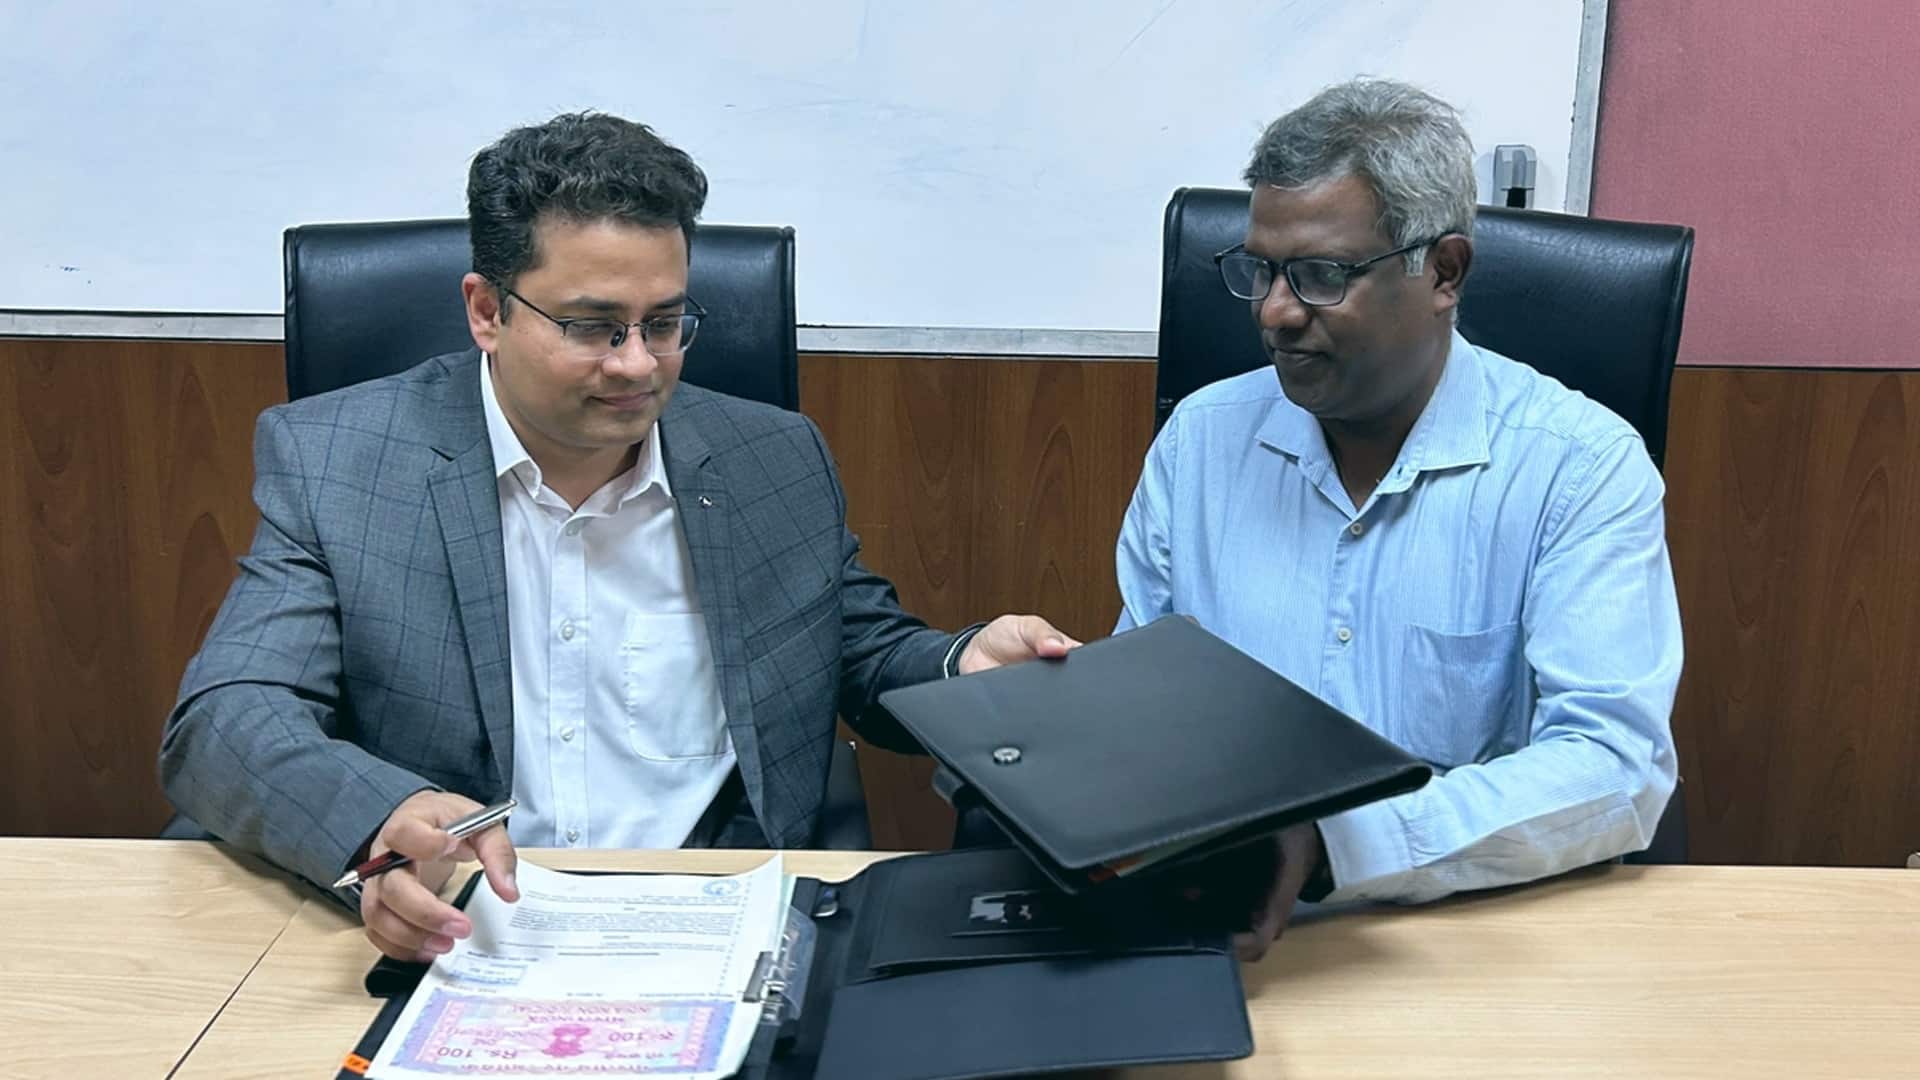 ISS India Aims for Growth through Innovation and Technology Partnerships; Recent MoU with SINE IIT Bombay to Support Start-ups